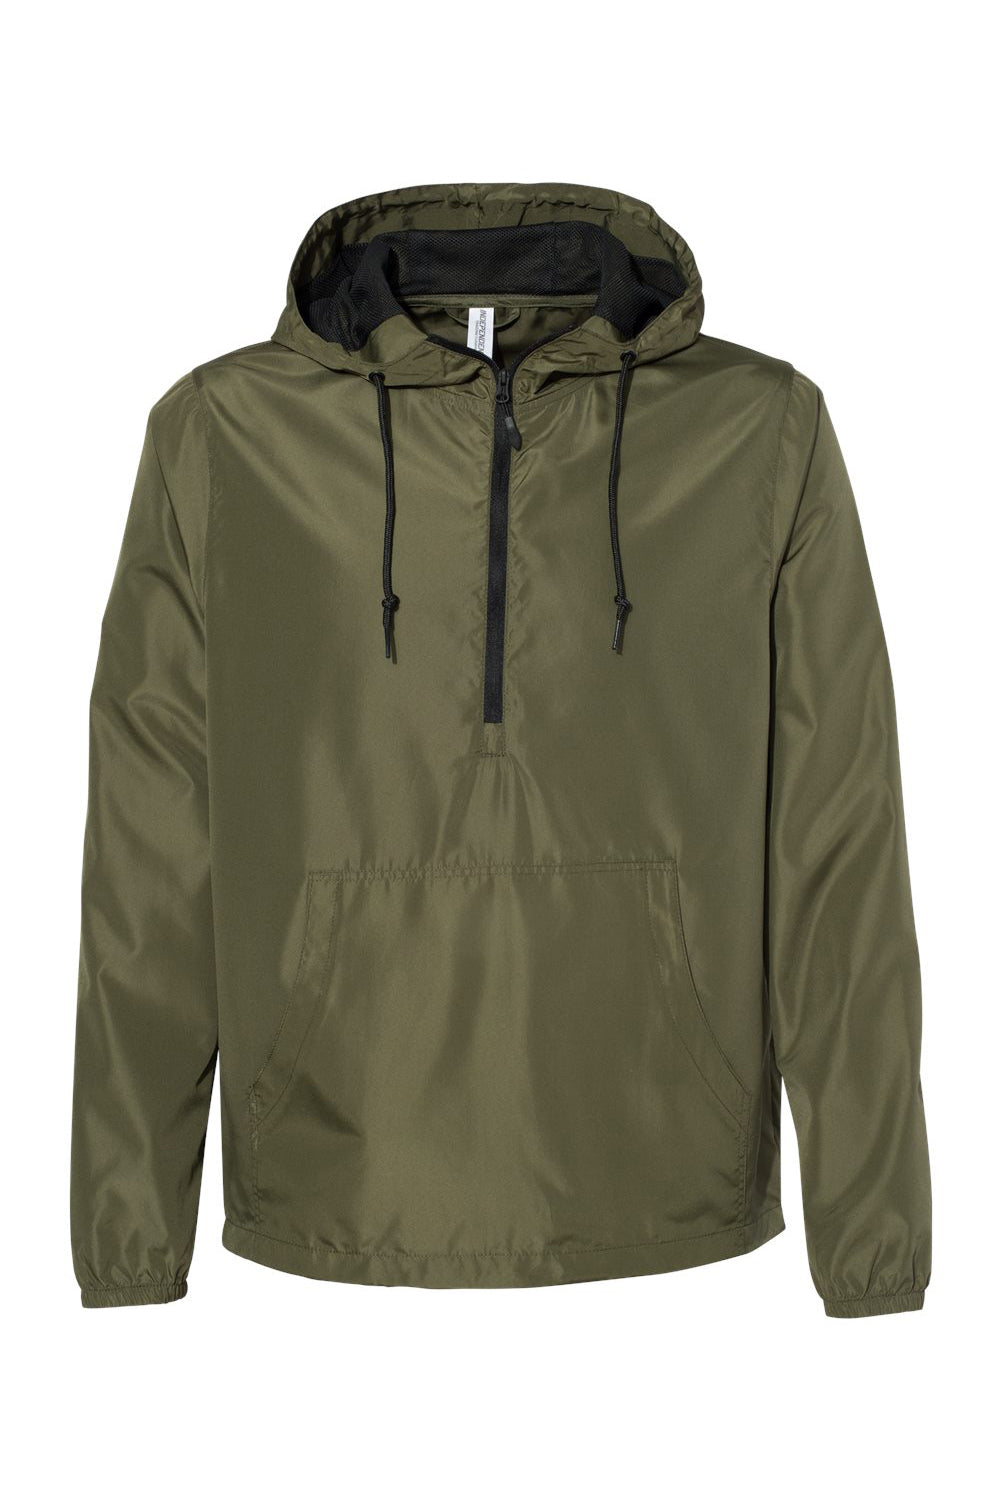 Independent Trading Co. EXP54LWP Mens 1/4 Zip Windbreaker Hooded Jacket Army Green Flat Front